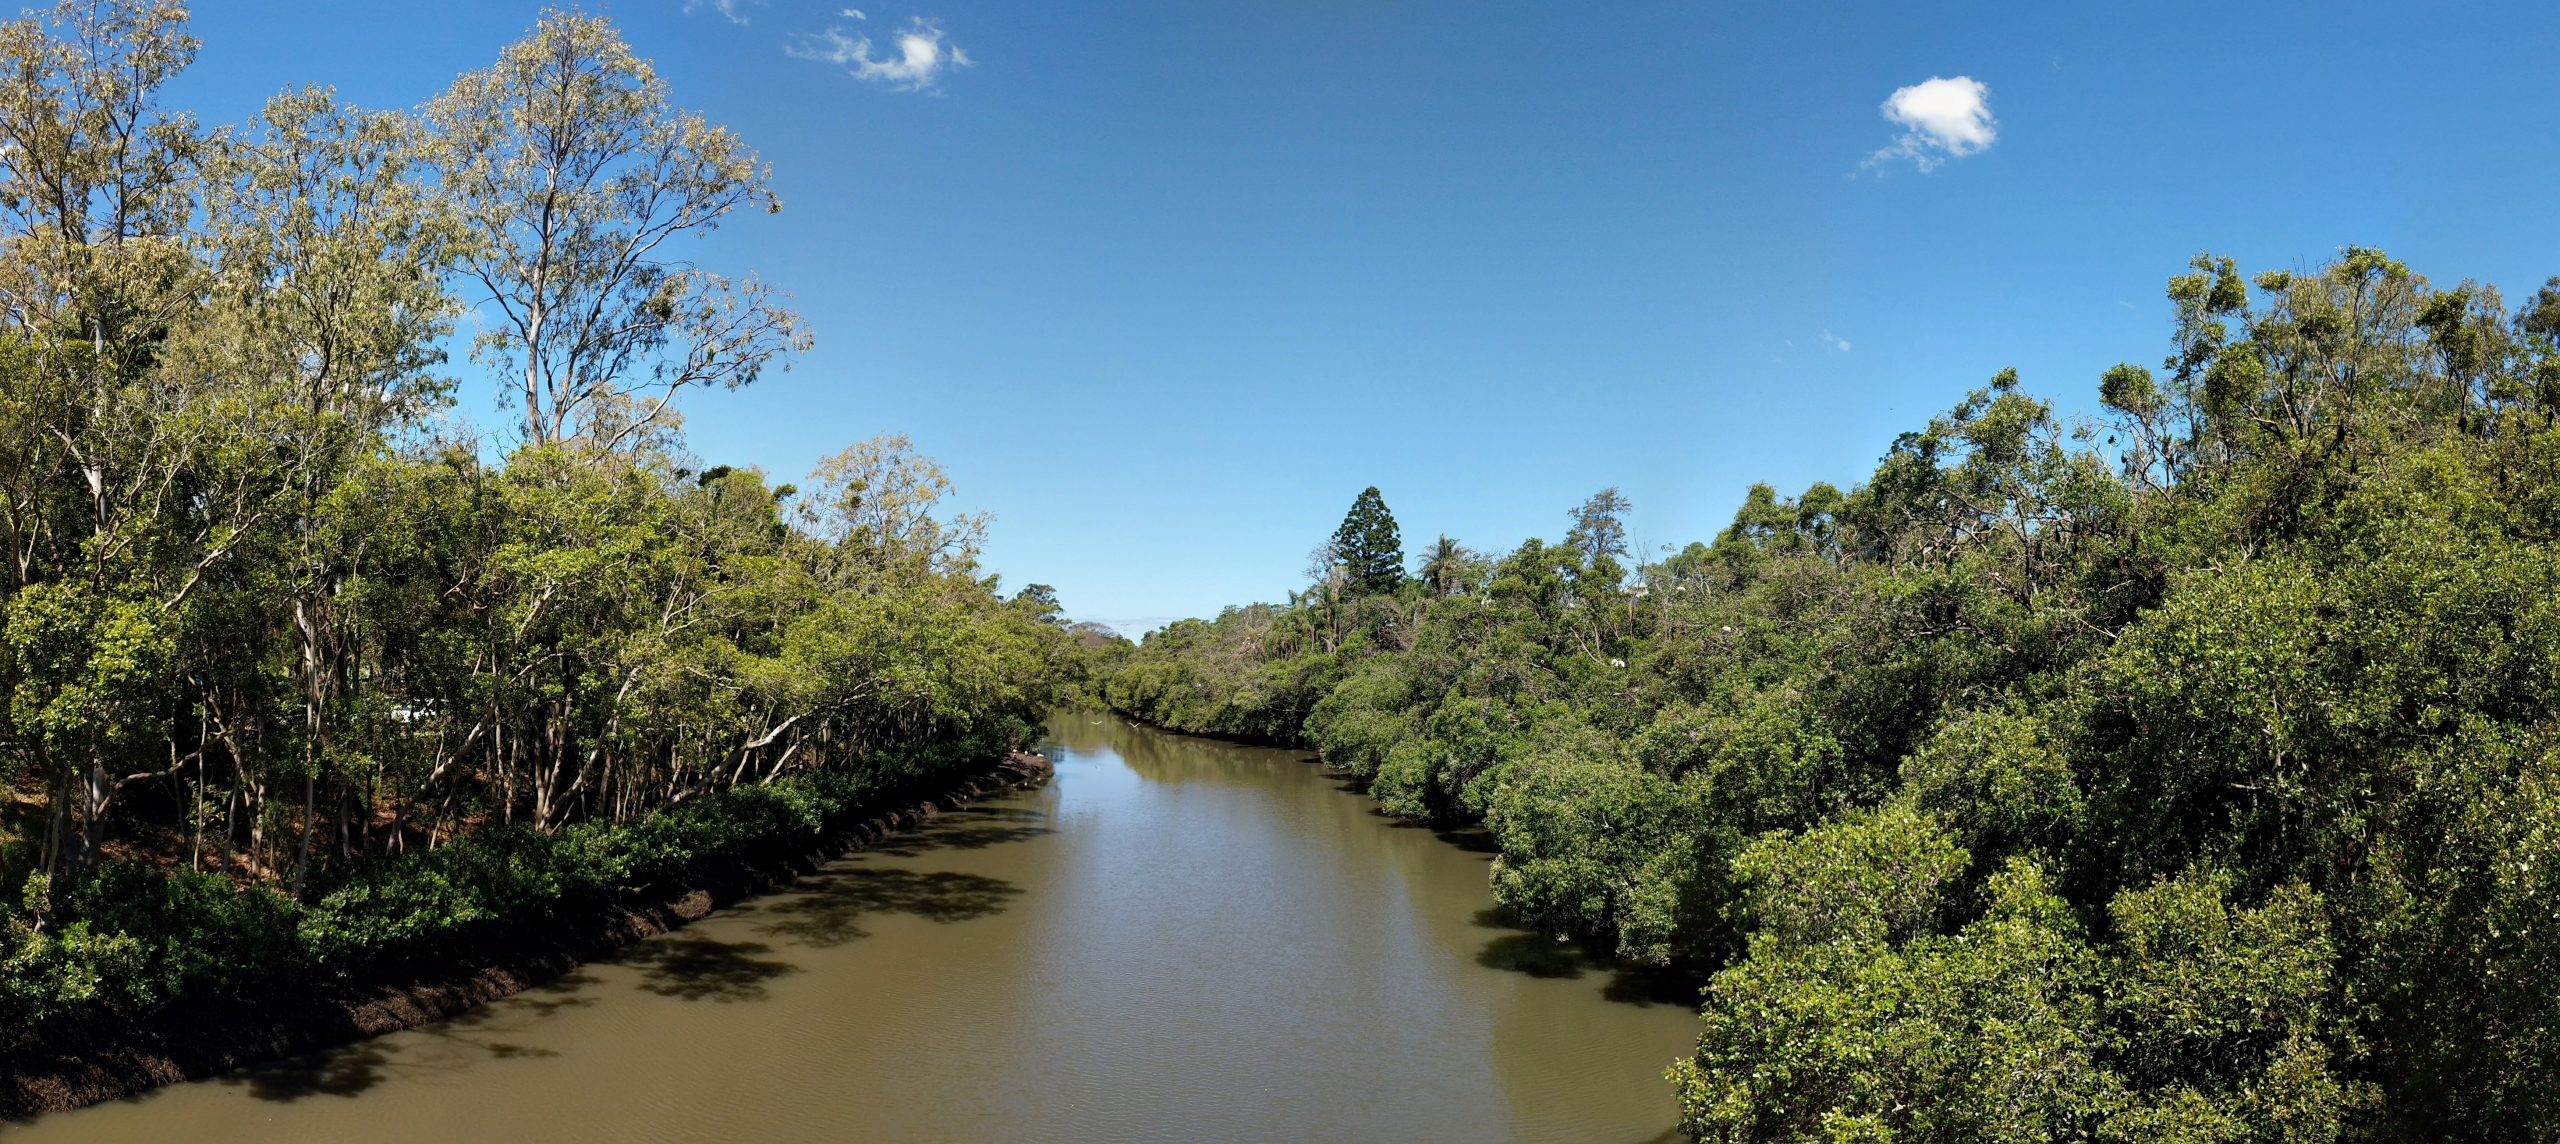 A green-brown creek surrounded by mangroves and gum trees. The sky is bright blue with only a couple of small puffy clouds.